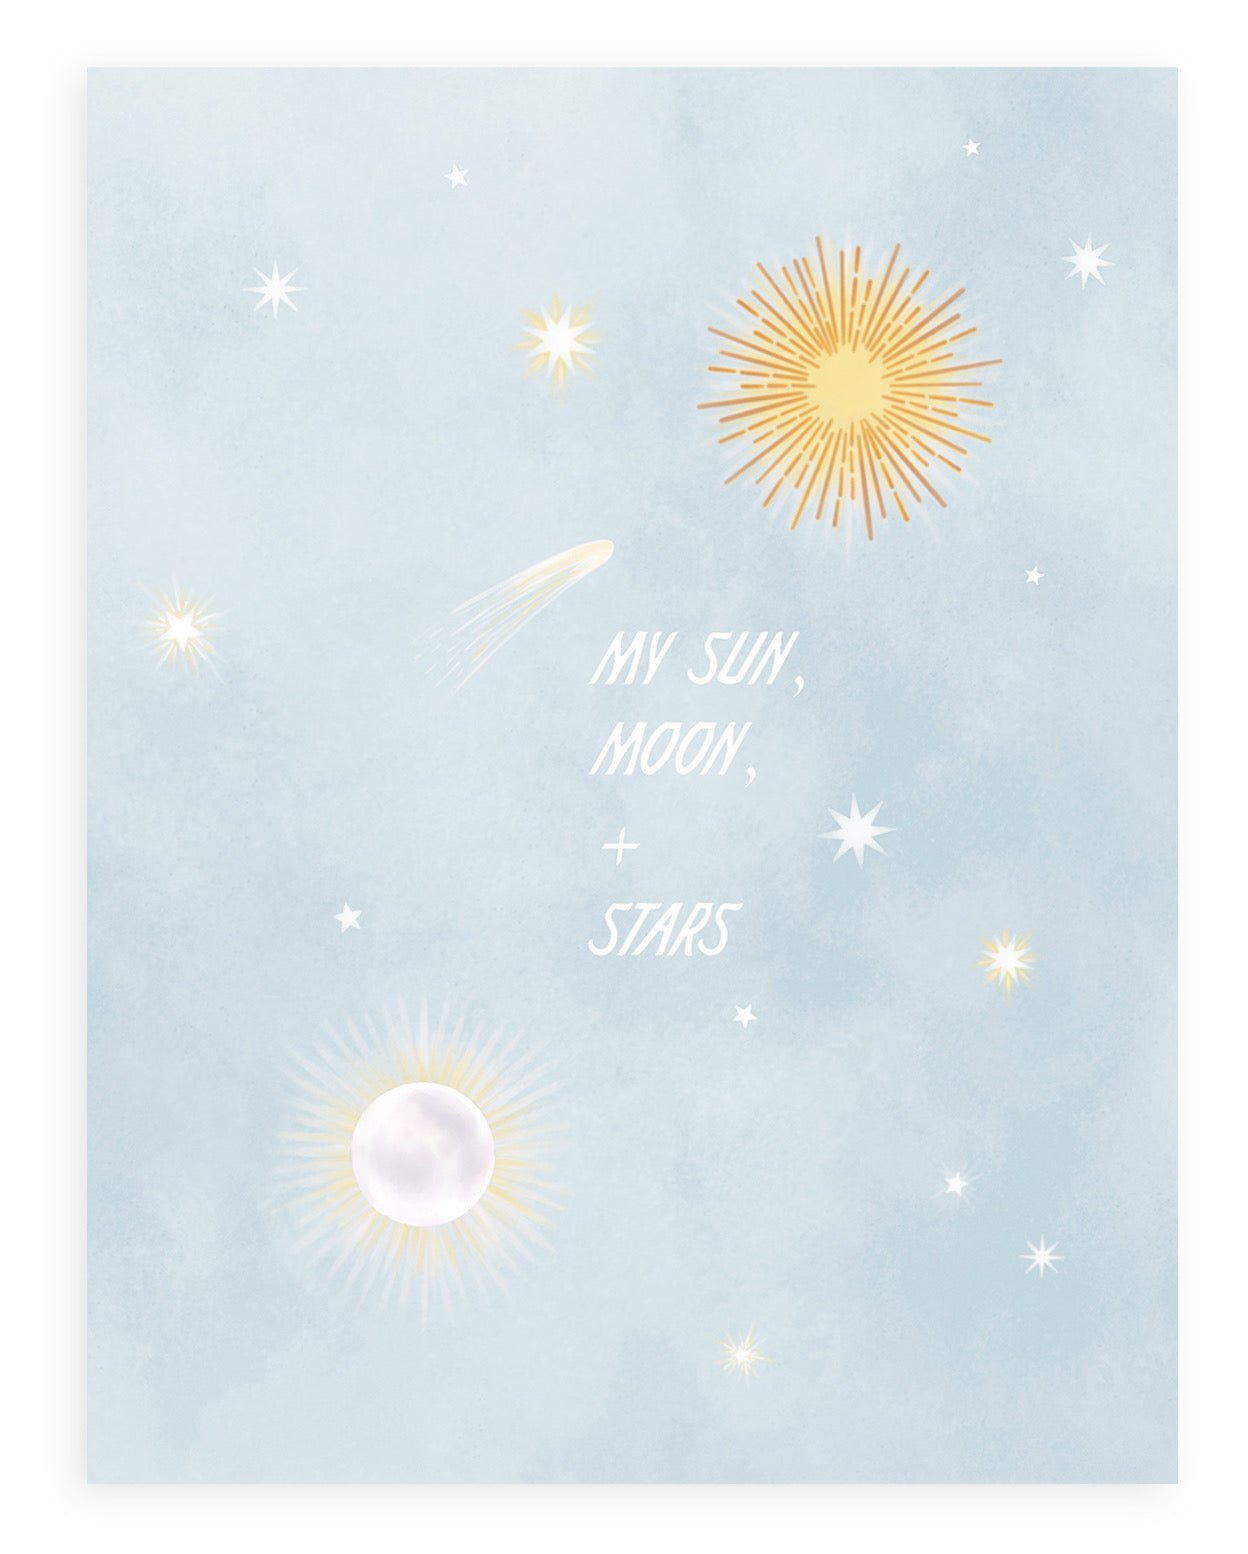 Blue sky with sun, moon, stars and text that reads "My Sun, Moon, + Stars." Shown on white background.